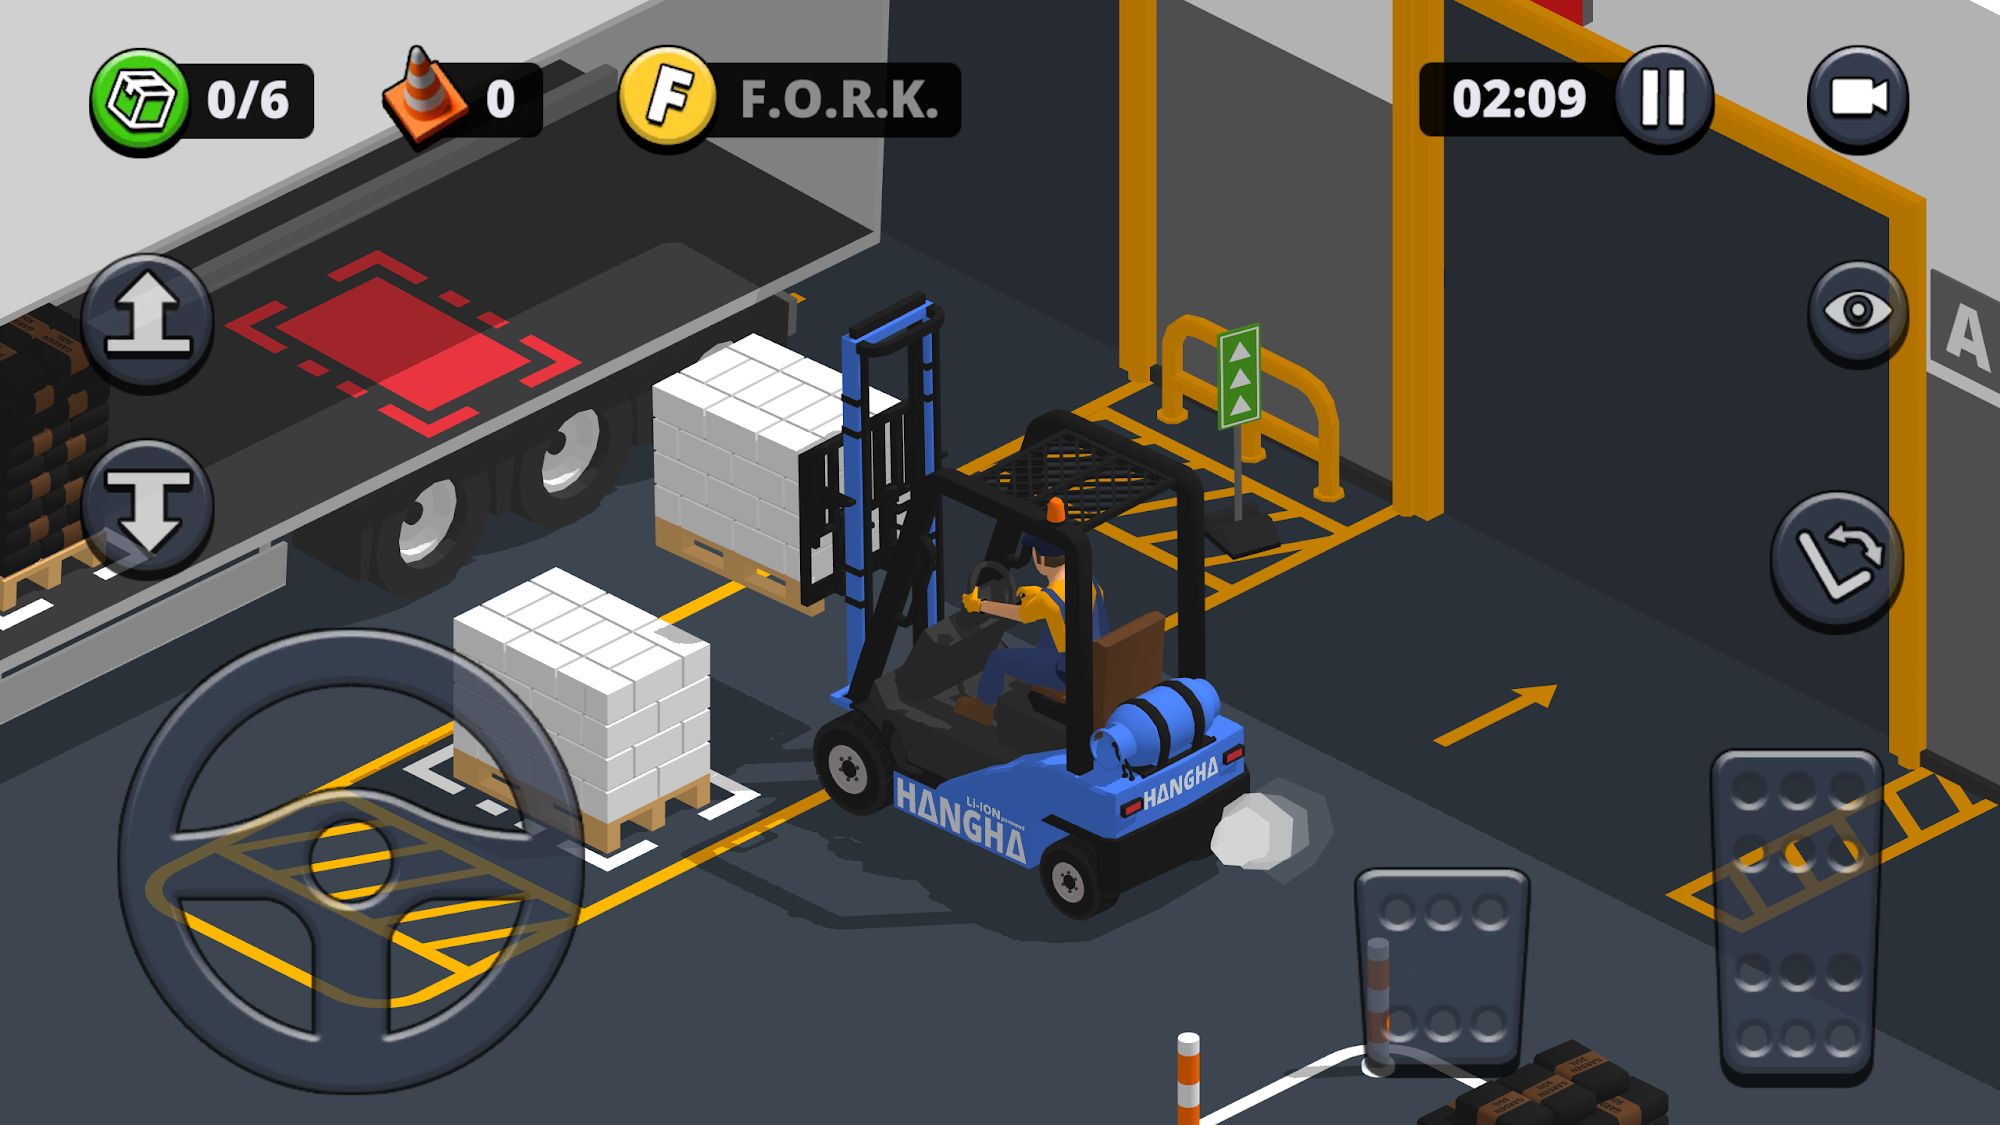 Forklift Extreme Simulator - Android game screenshots.